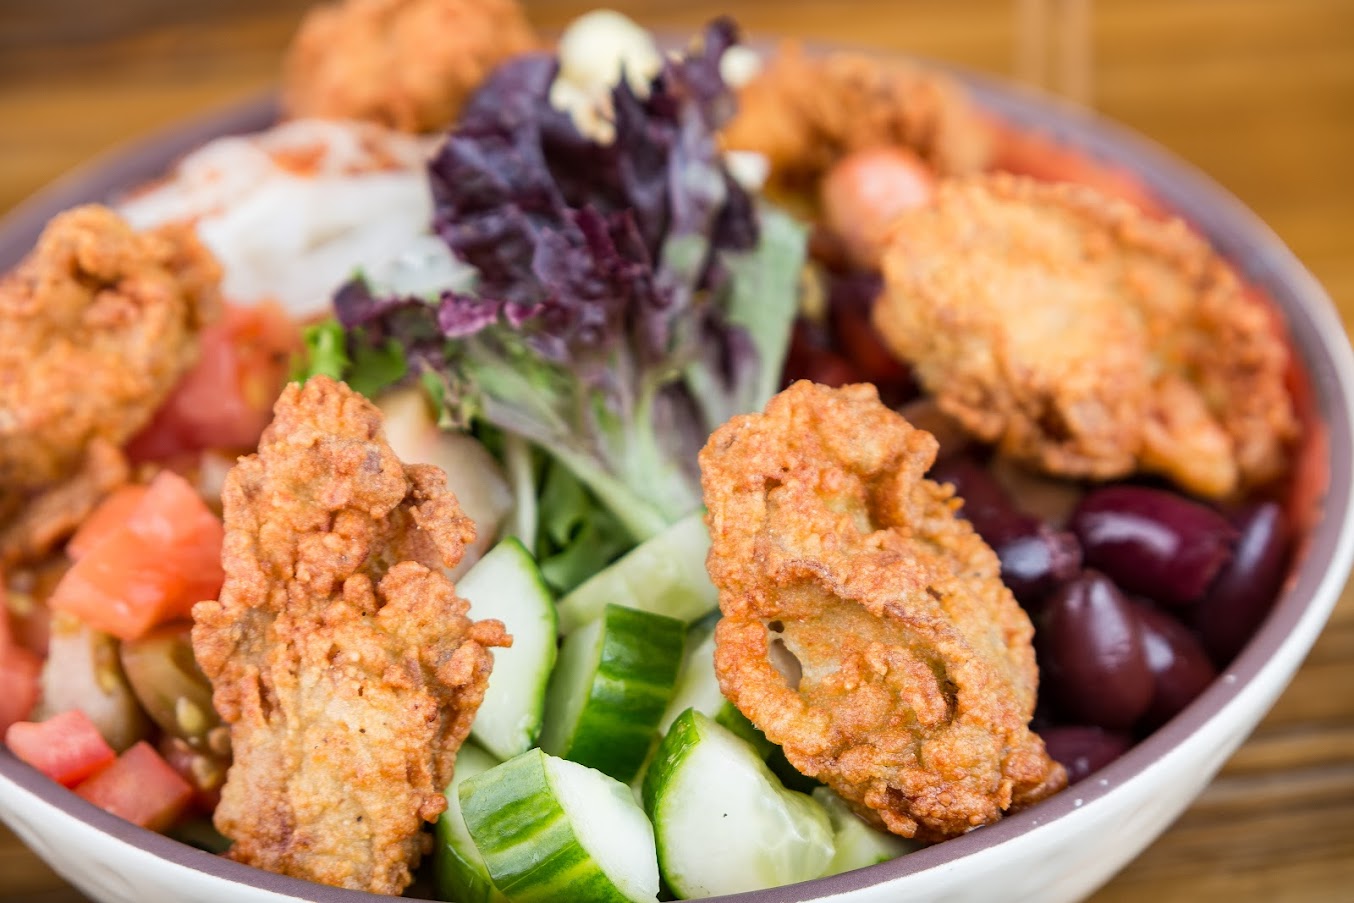 Fried oyster salad, with tomato, cucumber, lettuce, kalamata olives and onion